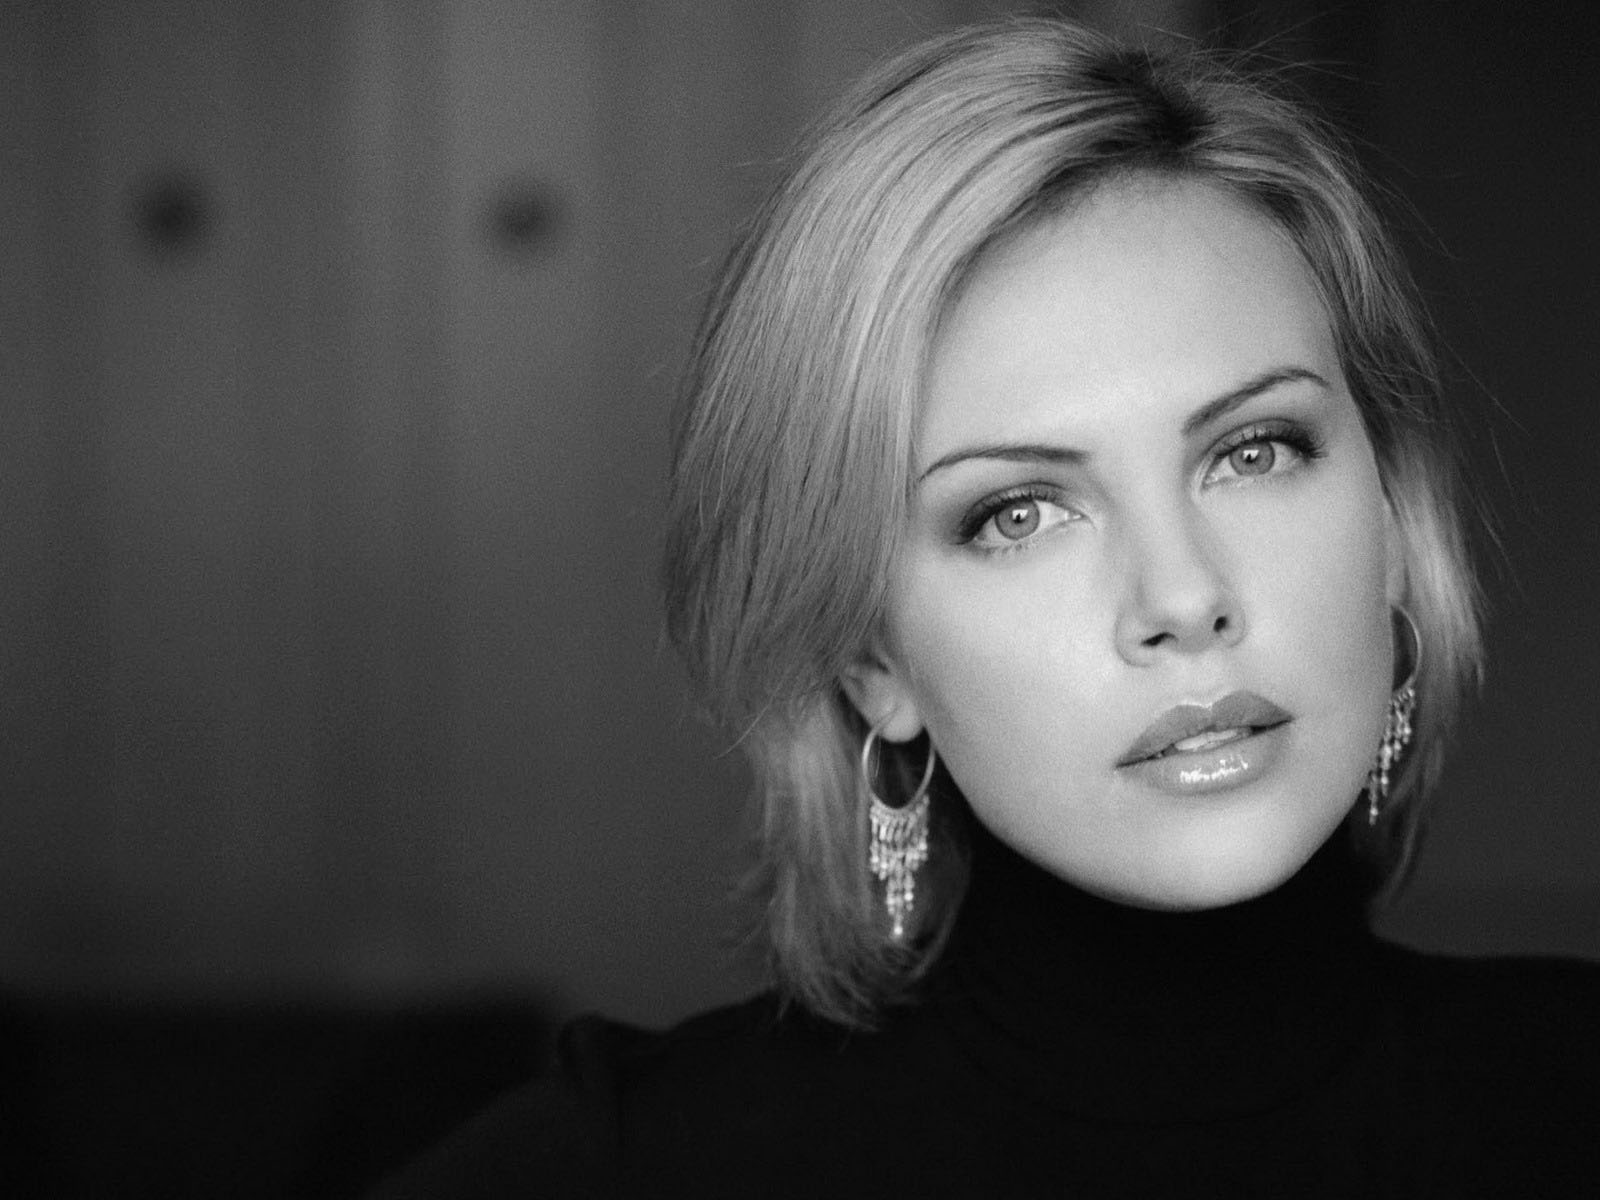 Stunning Charlize Theron Cute Look Hd Background Free Wallpaper Desktop Mobile